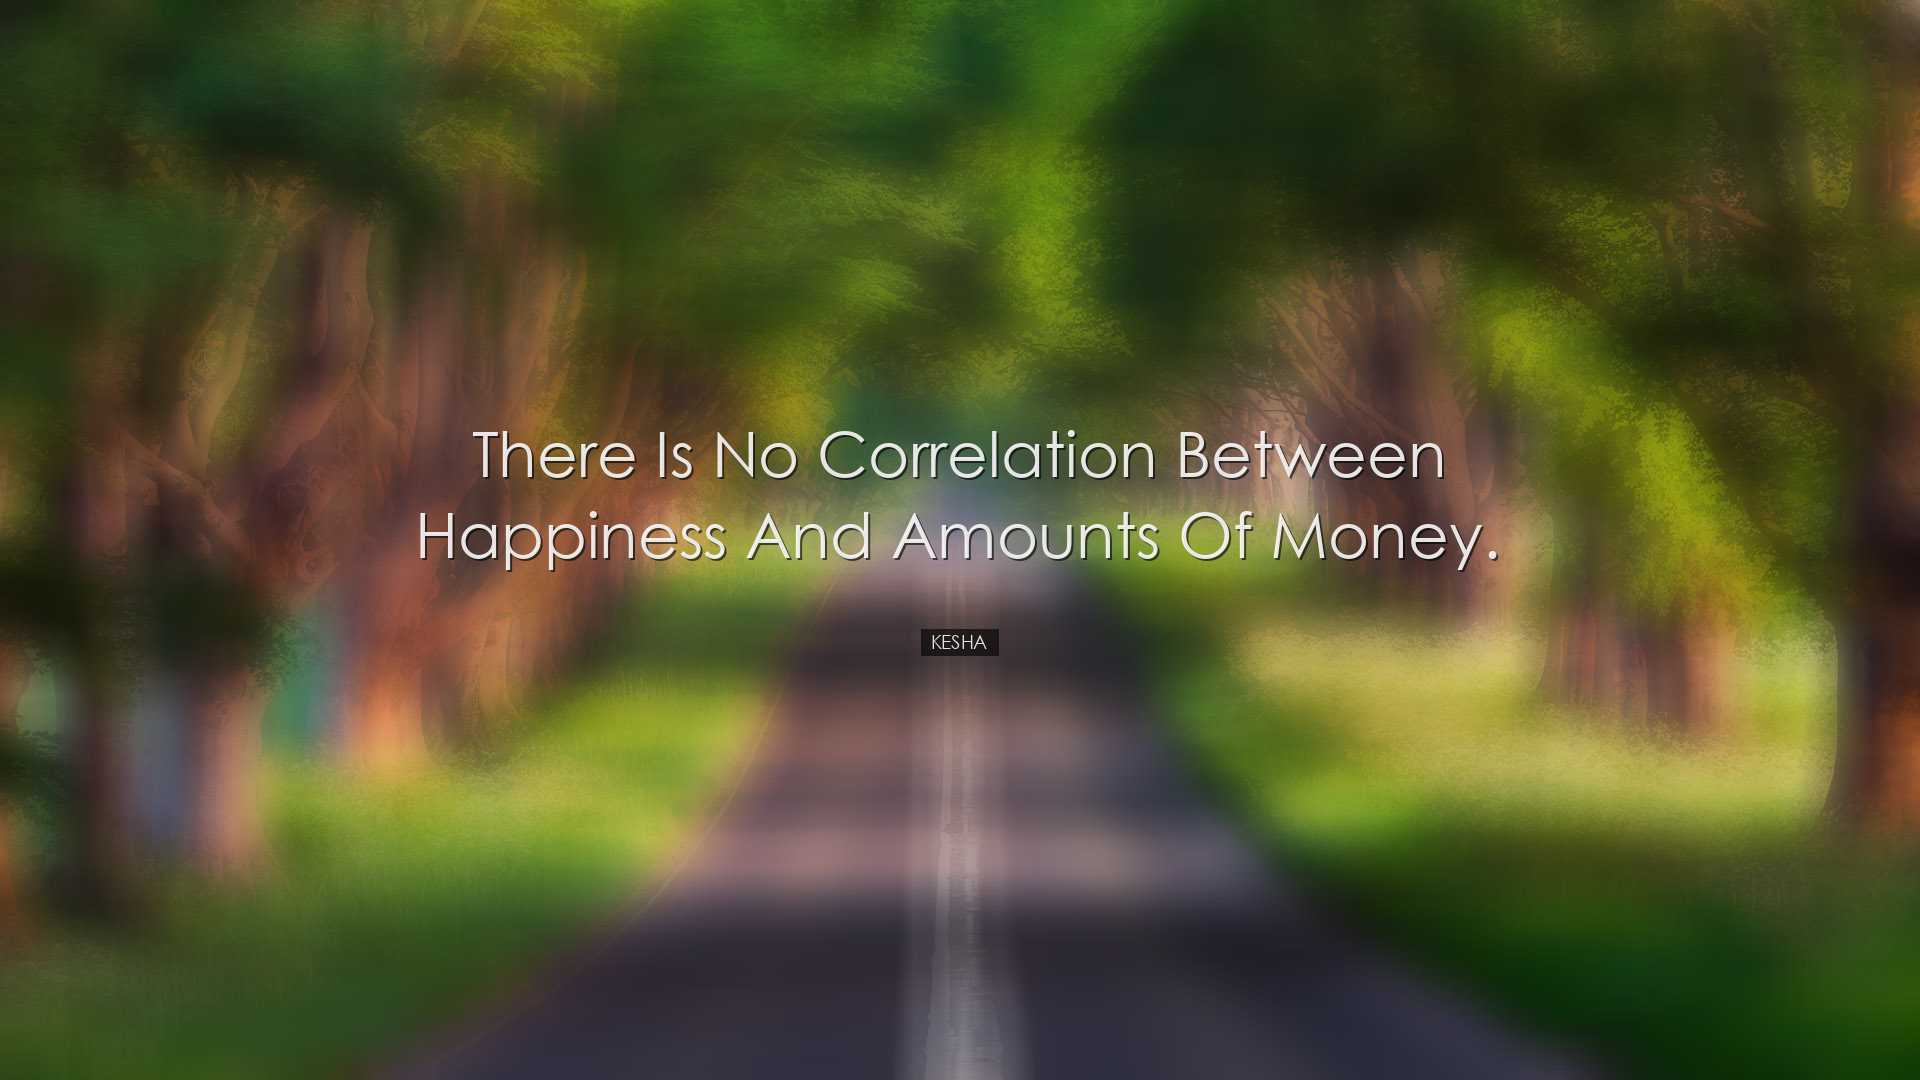 There is no correlation between happiness and amounts of money. -